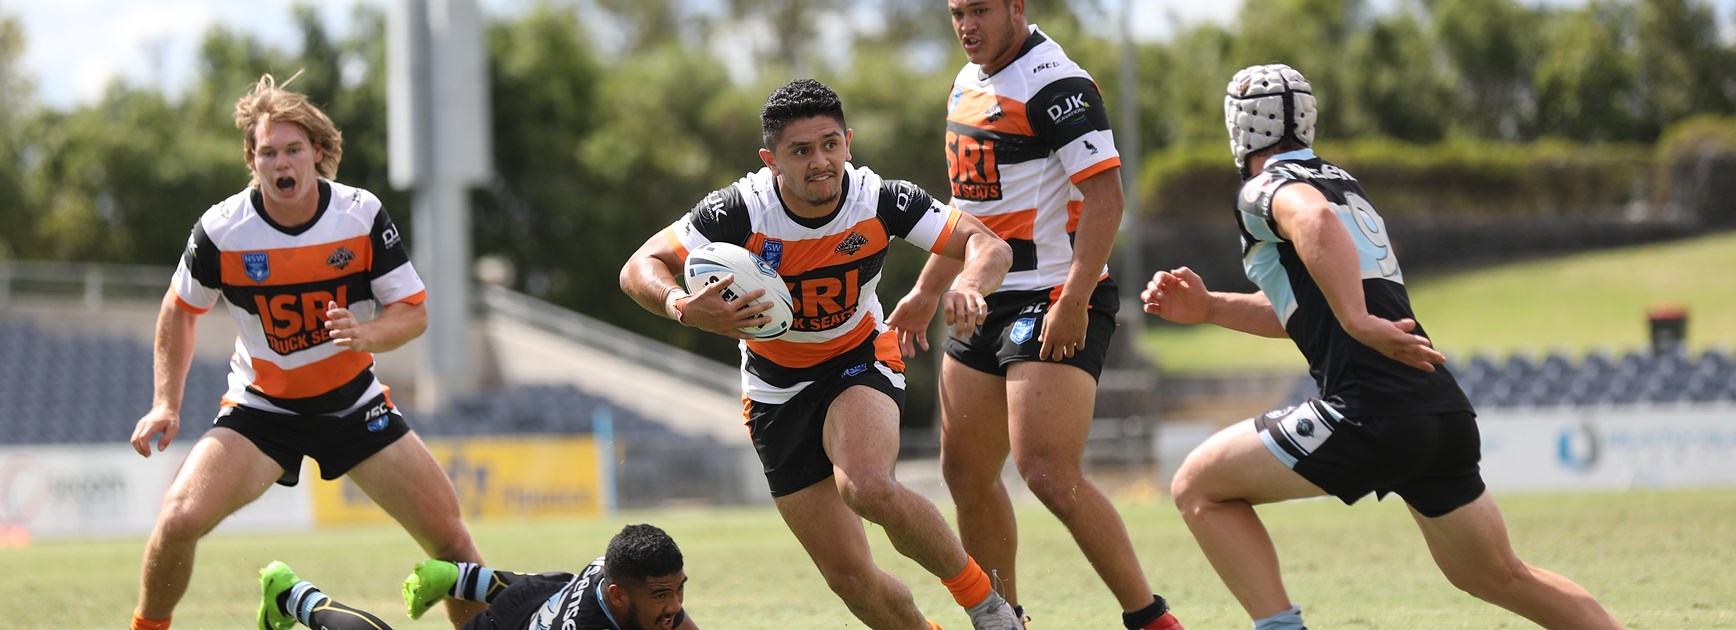 Wests Tigers Jersey Flegg downed by Sharks